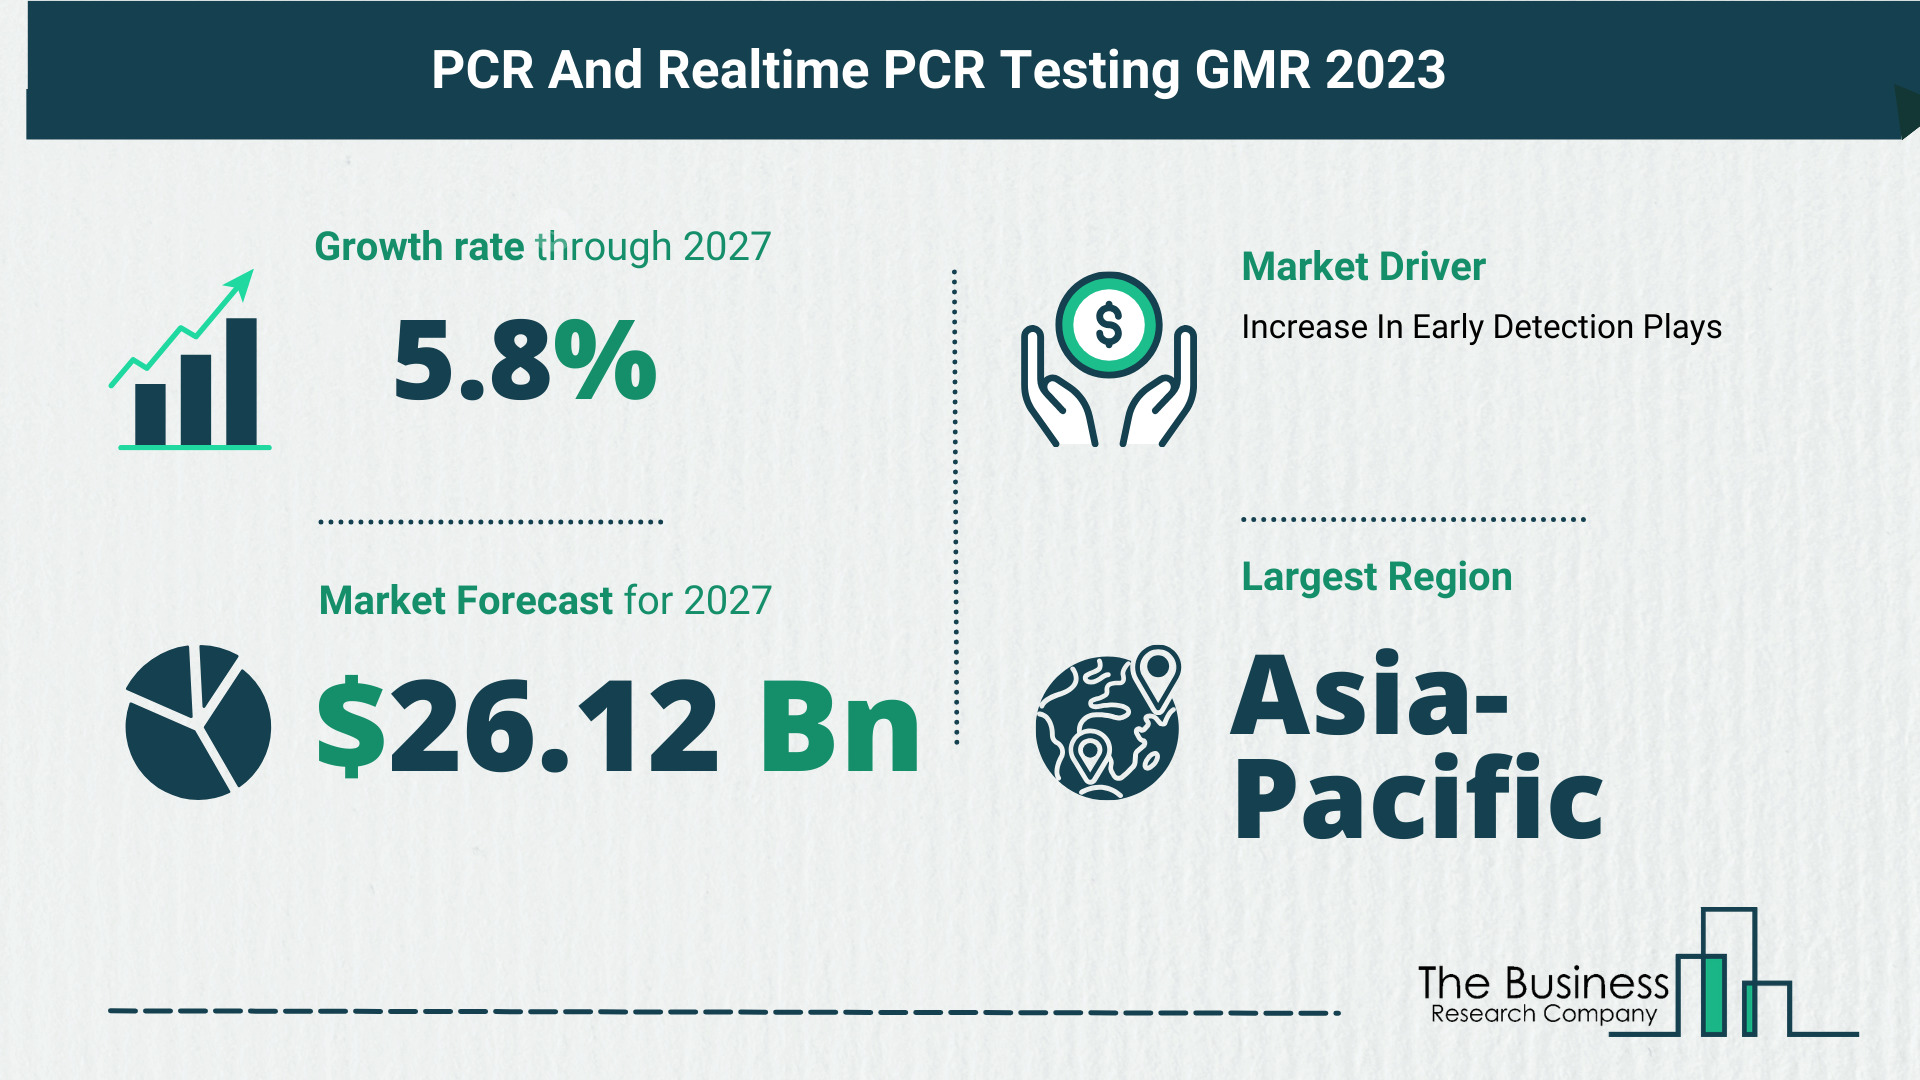 What Is The Forecast Growth Rate For The PCR And Realtime PCR Testing Market?